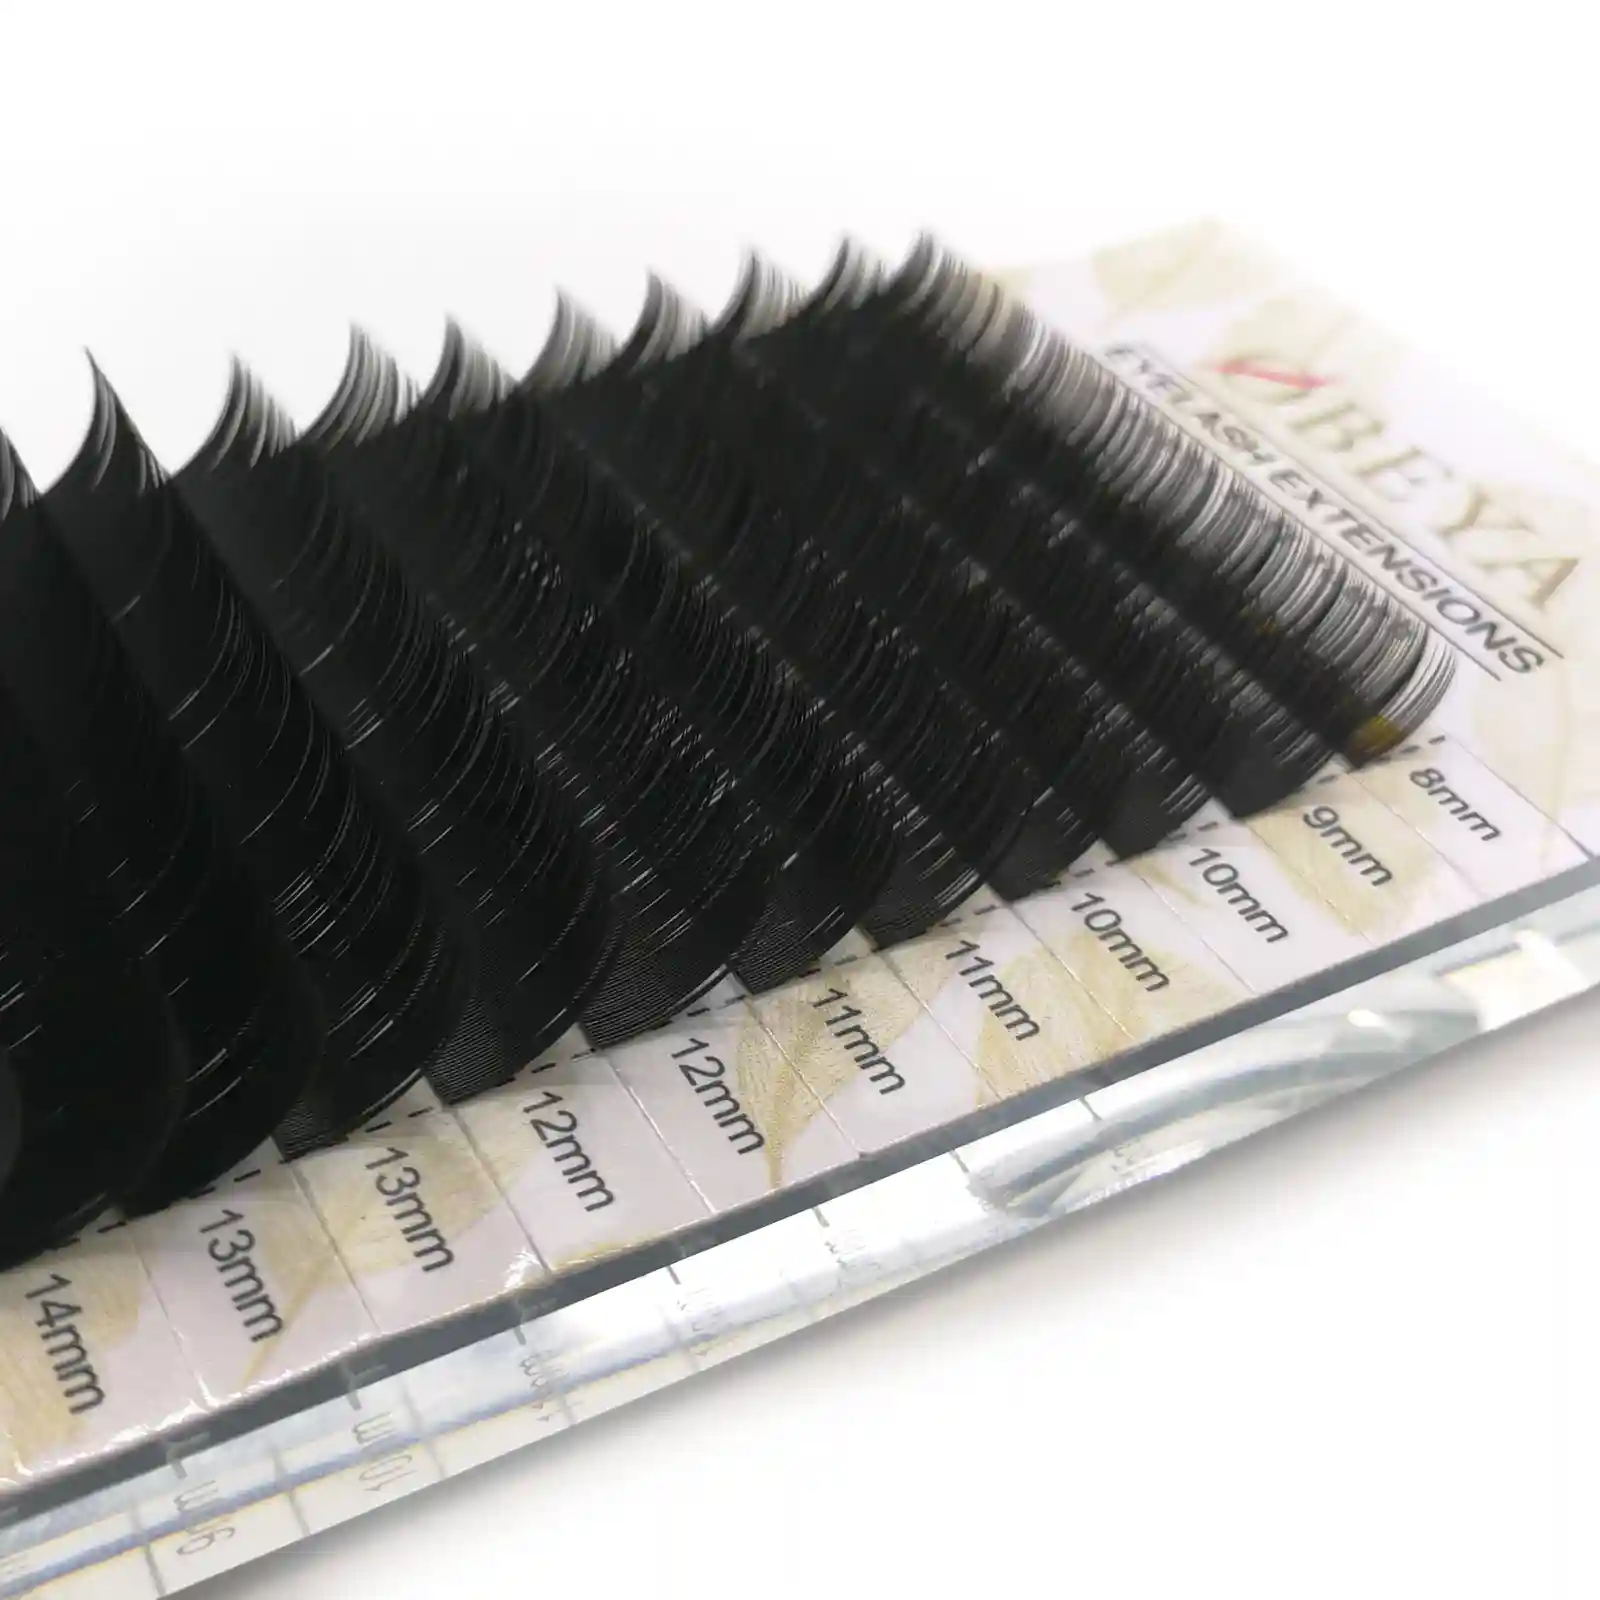 Russian Volume Individual Lashes: Get Ready for a Fluttery, Gorgeous Look